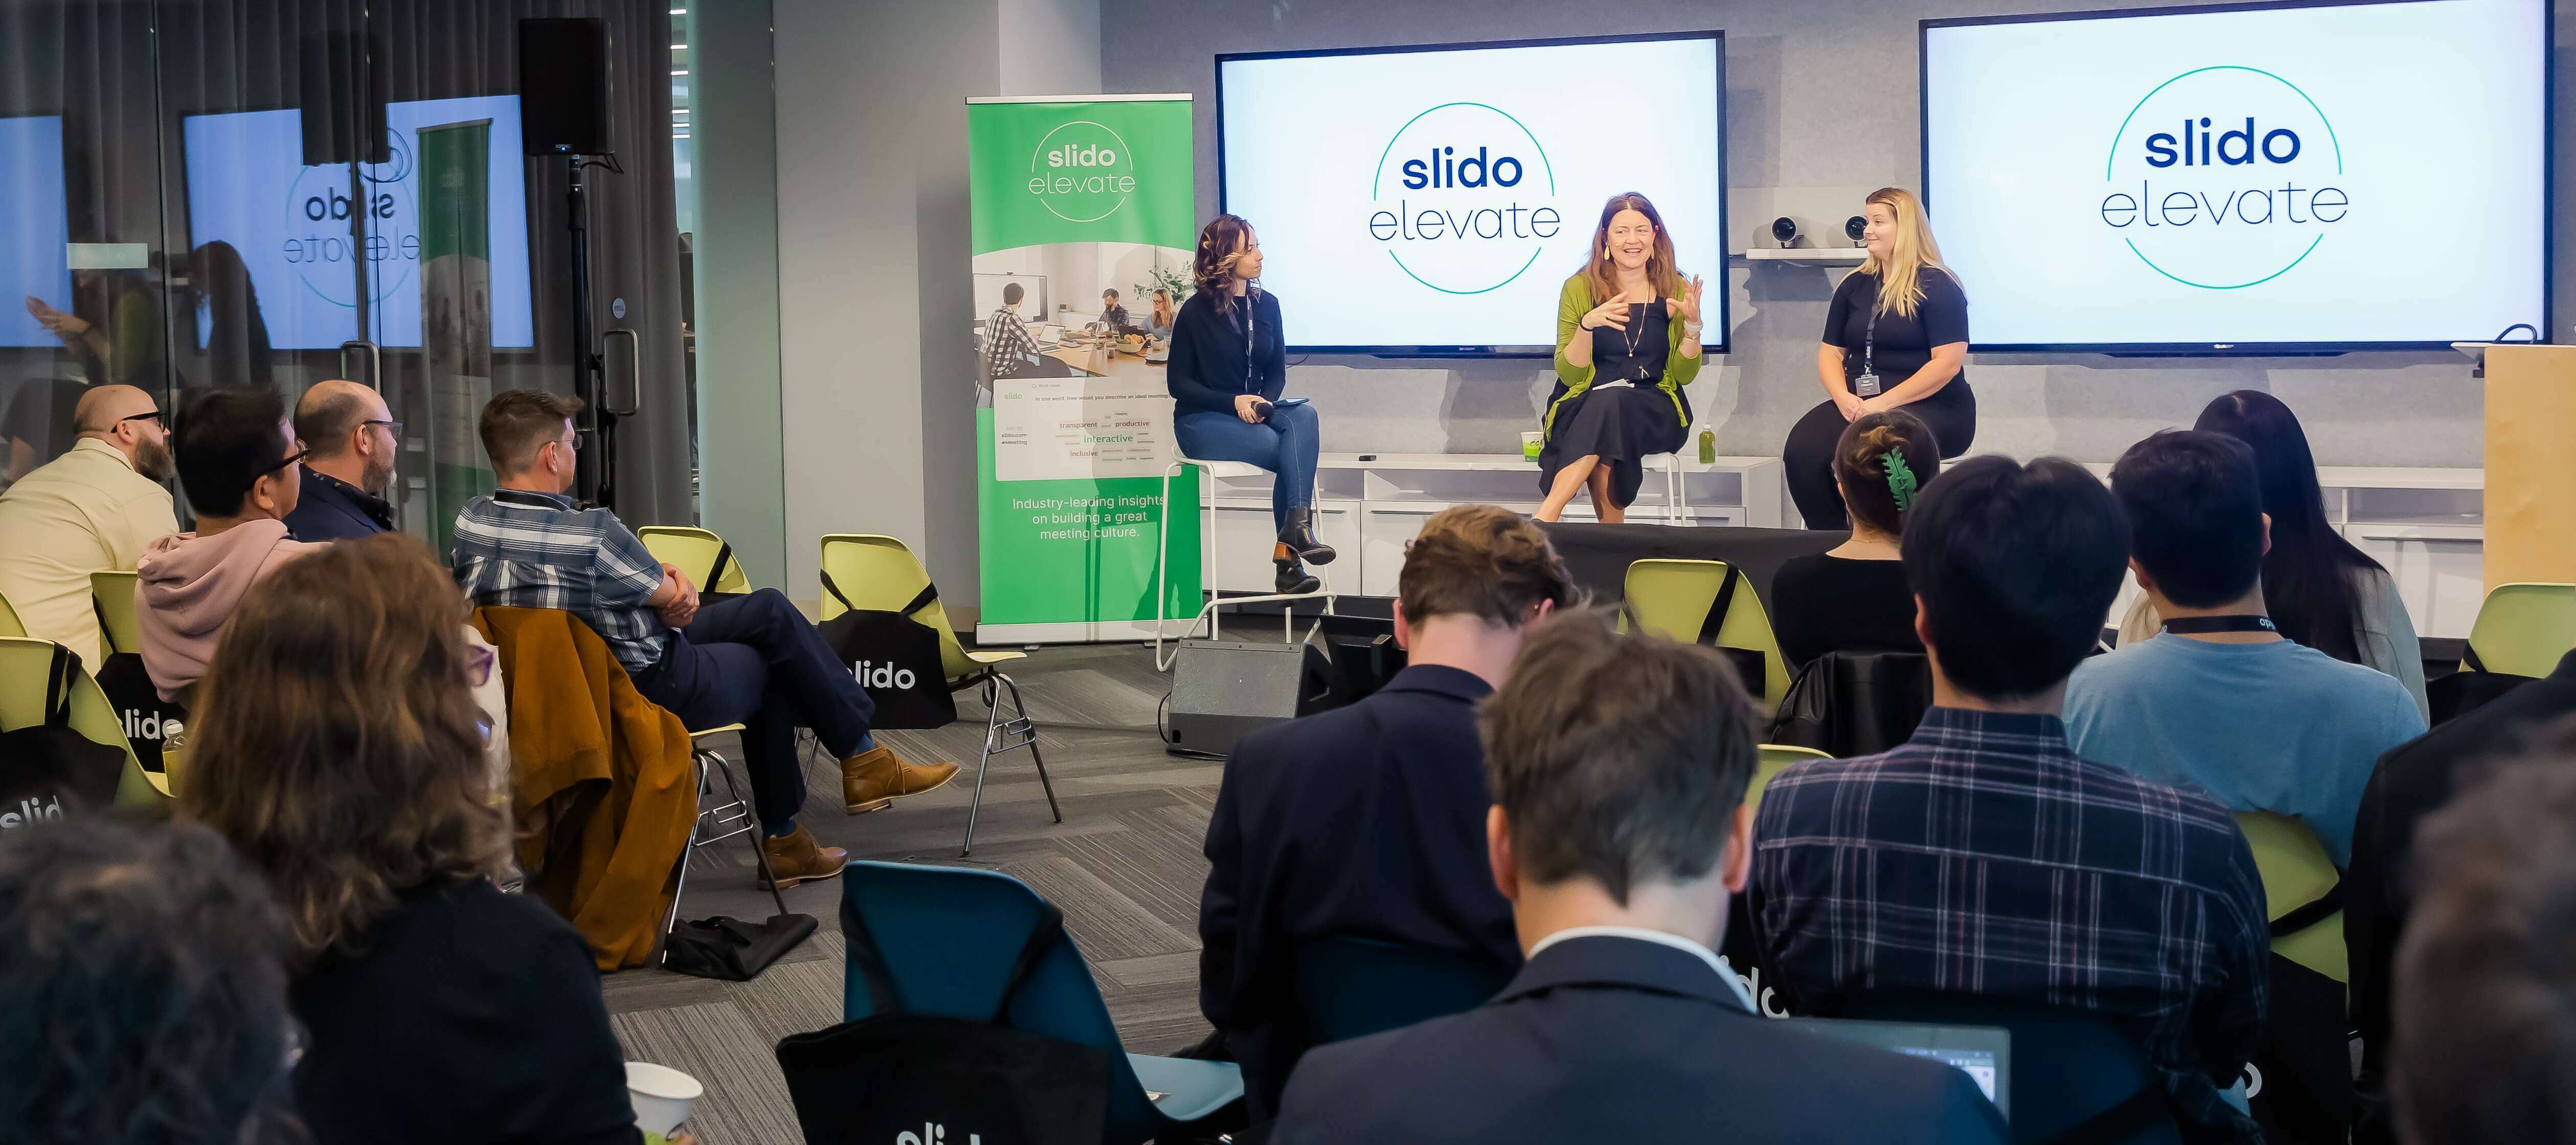 Slido Elevate: How to build a healthy team culture in a hybrid world